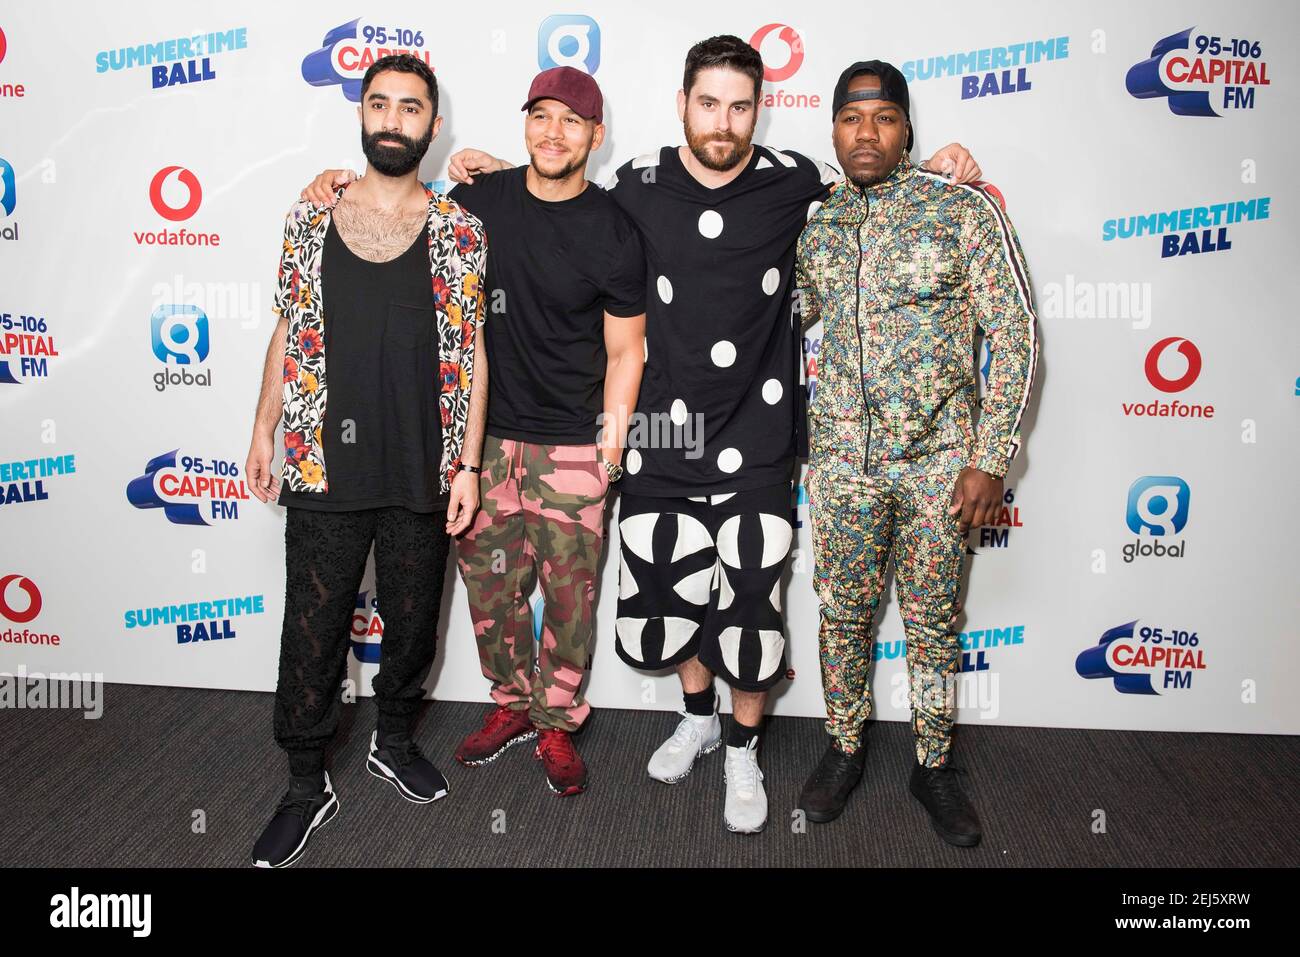 Rudimental on the red carpet of the media run at Capital's Summertime Ball with Vodafone at Wembley Stadium, London. This summer's hottest artists performed live for 80,000 Capital listeners at Wembley Stadium at the UK's biggest summer party. Performers included Camila Cabello, Shawn Mendes, Rita Ora, Charlie Puth, Jess Glyne, Craig David, Anne-Marie, Rudimental, Sean Paul, Clean Bandit, James Arthur, Sigala, Years & Years, Jax Jones, Raye, Jonas Blue, Mabel, Stefflon Don, Yungen and G-Eazy Stock Photo